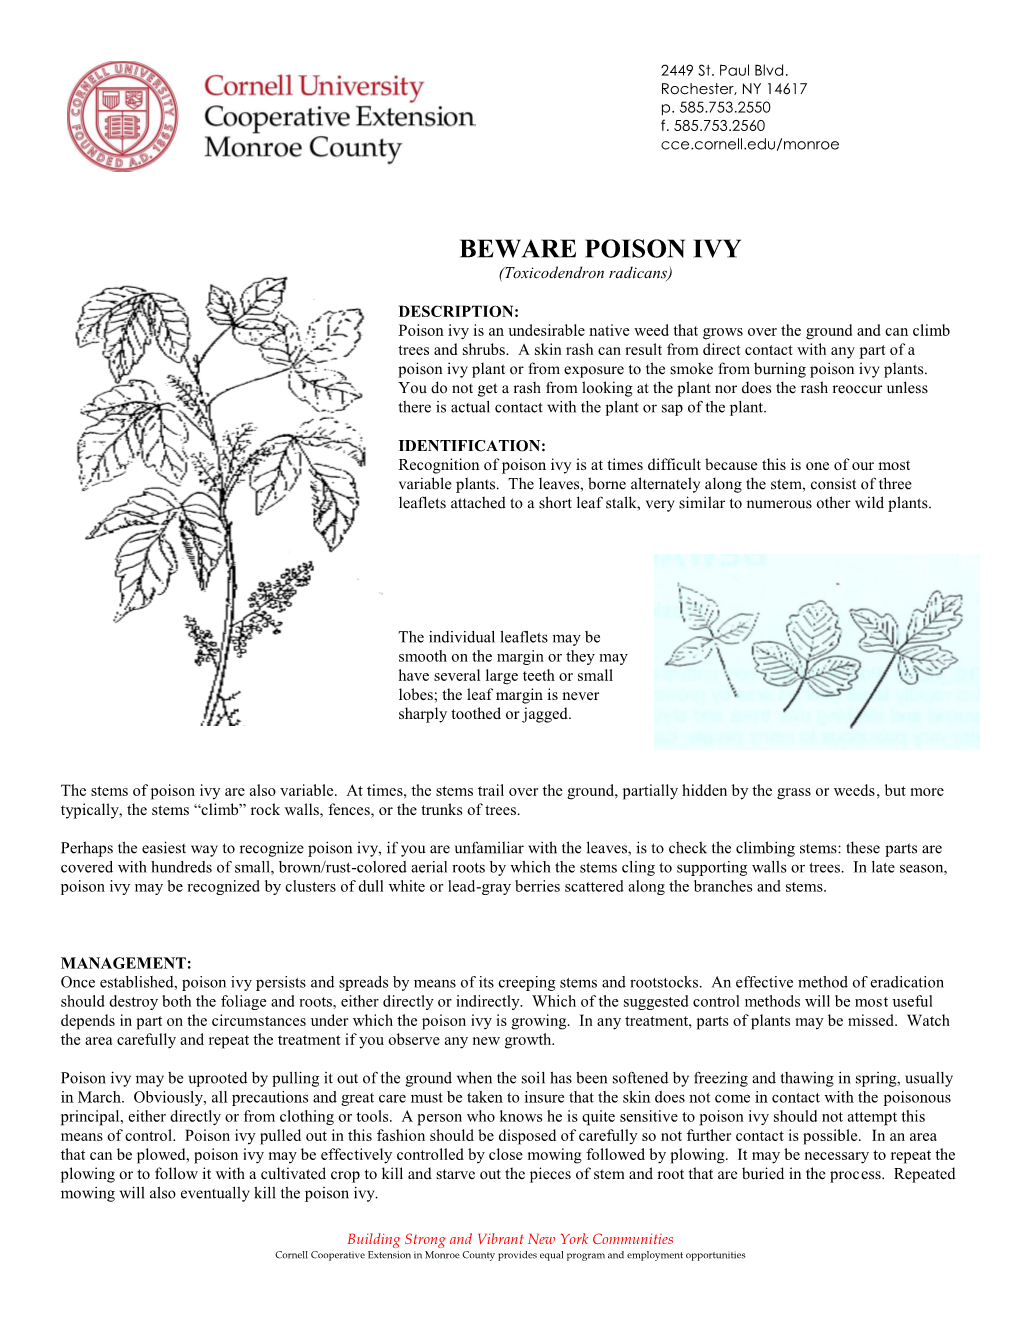 BEWARE POISON IVY (Toxicodendron Radicans)